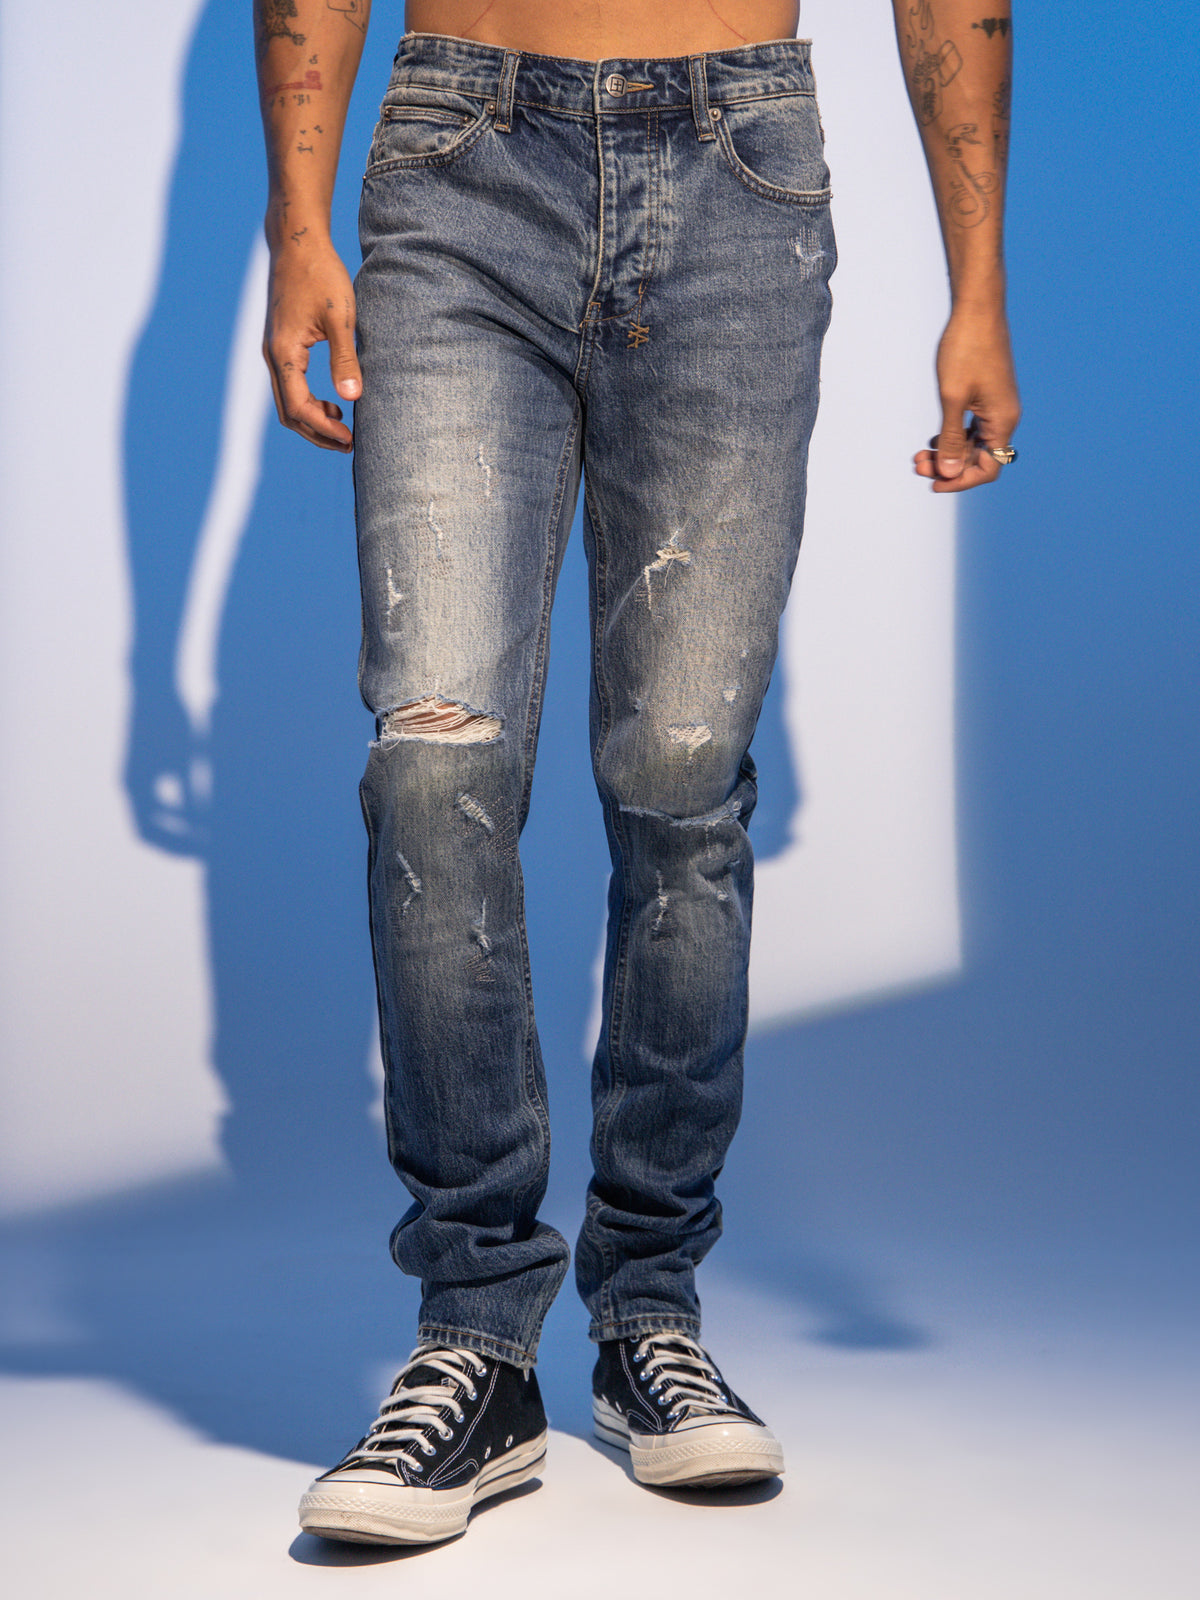 Chitch Slim Fit Jeans in Chronicle Trashed Blue